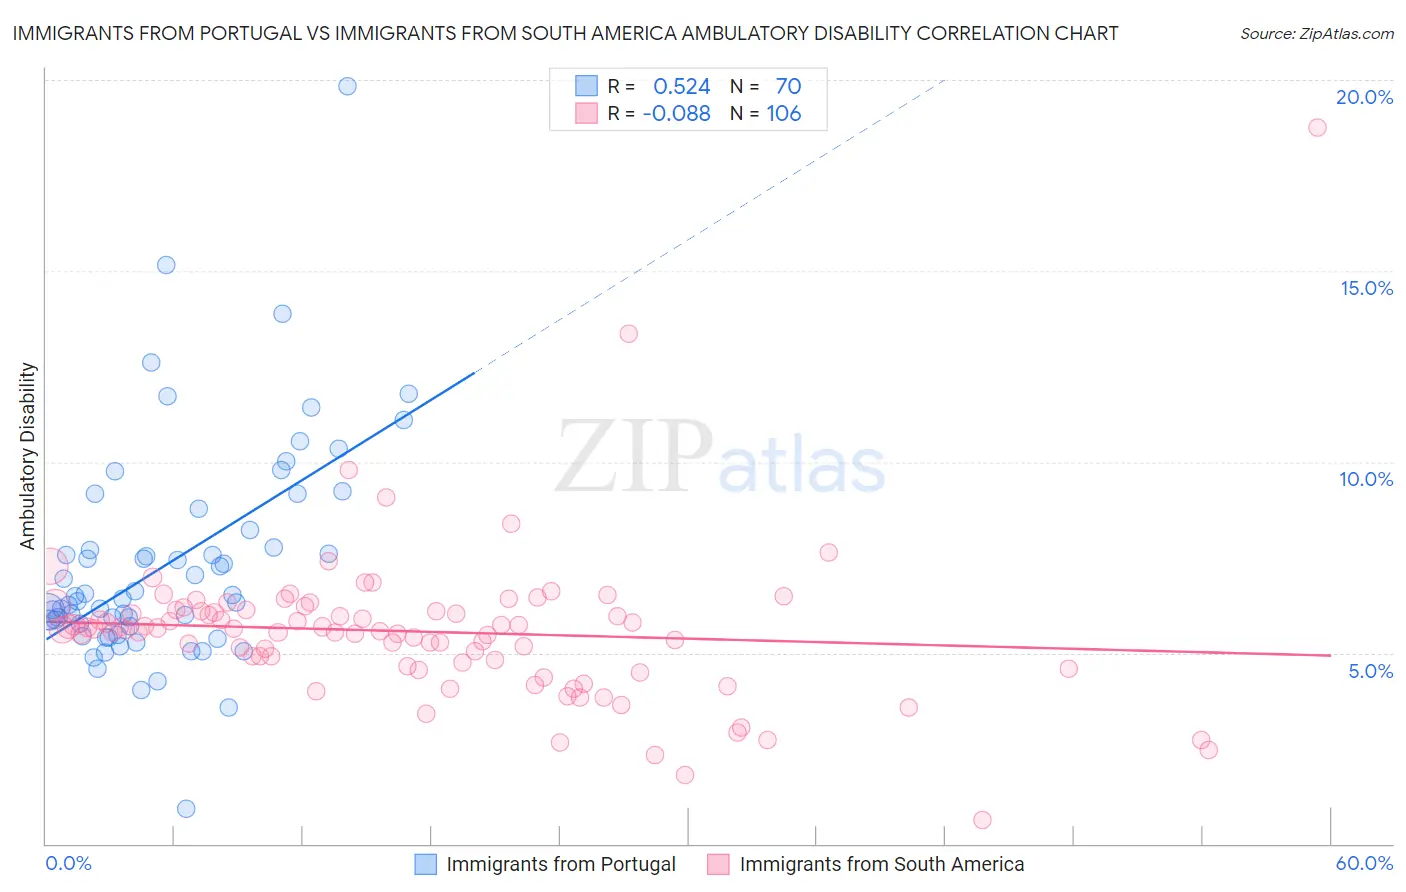 Immigrants from Portugal vs Immigrants from South America Ambulatory Disability